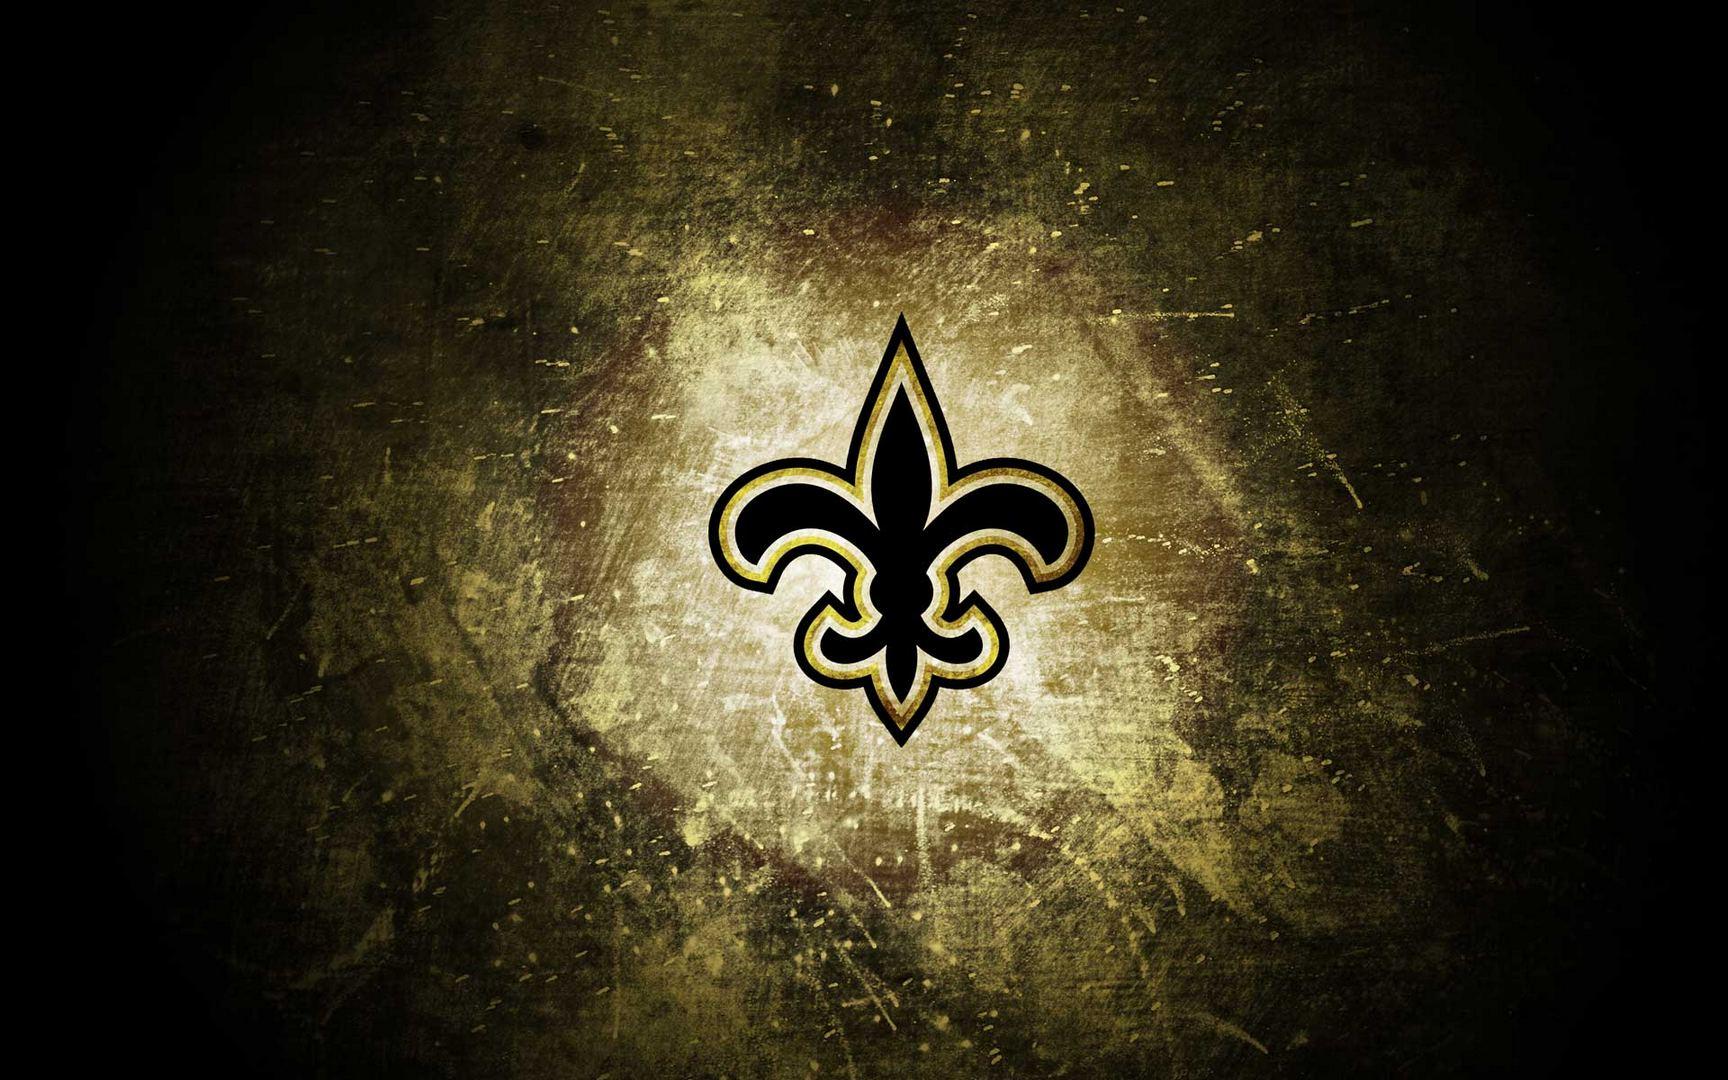 New Orleans Saints wallpapers hd free download